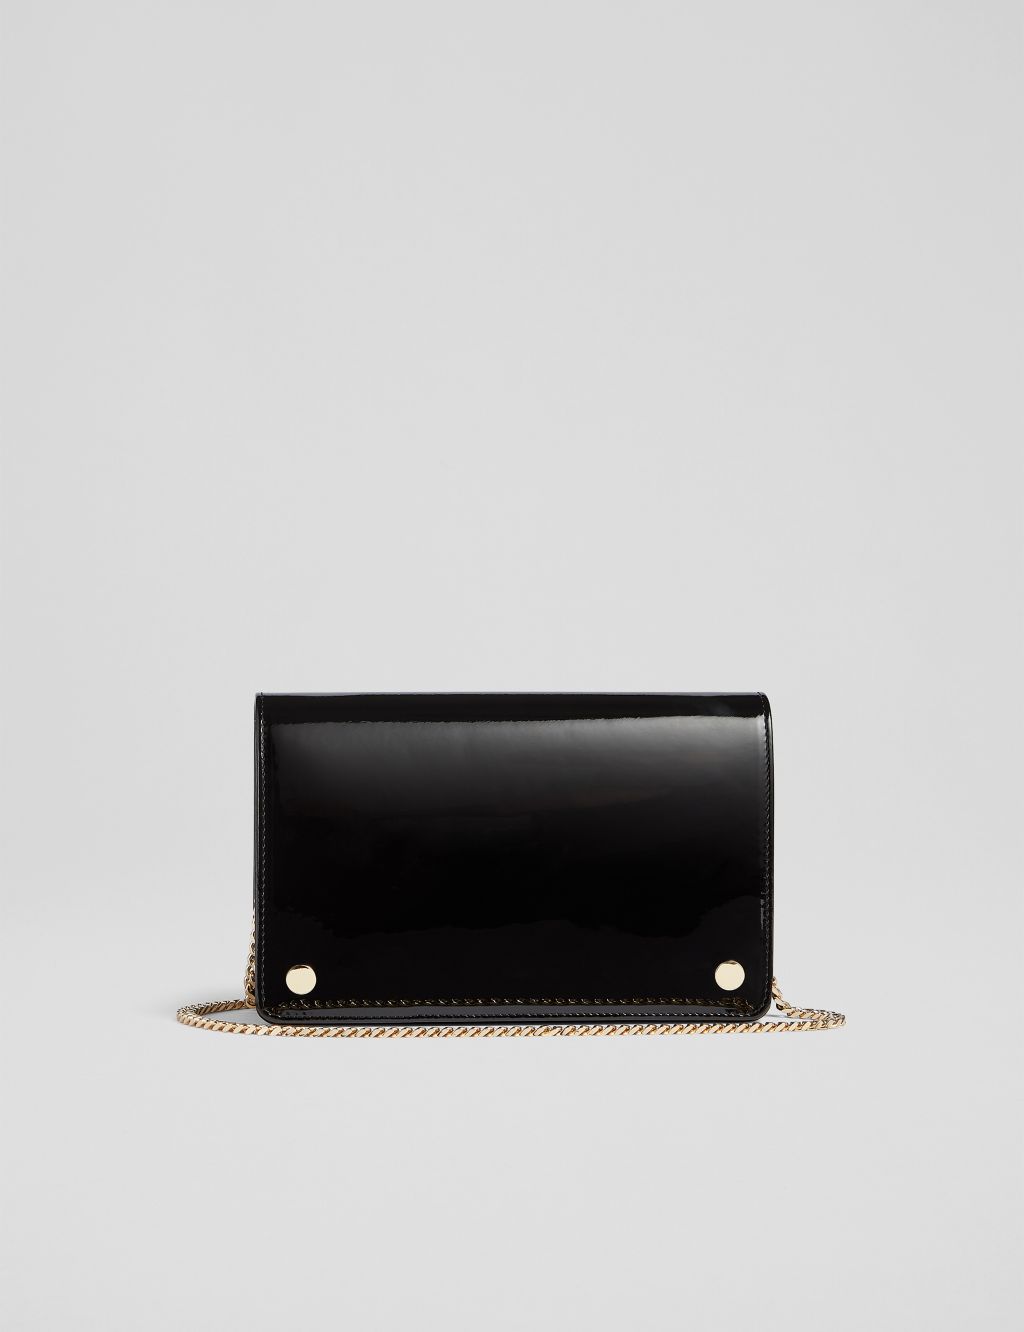 Leather Patent Finish Chain Strap Clutch Bag